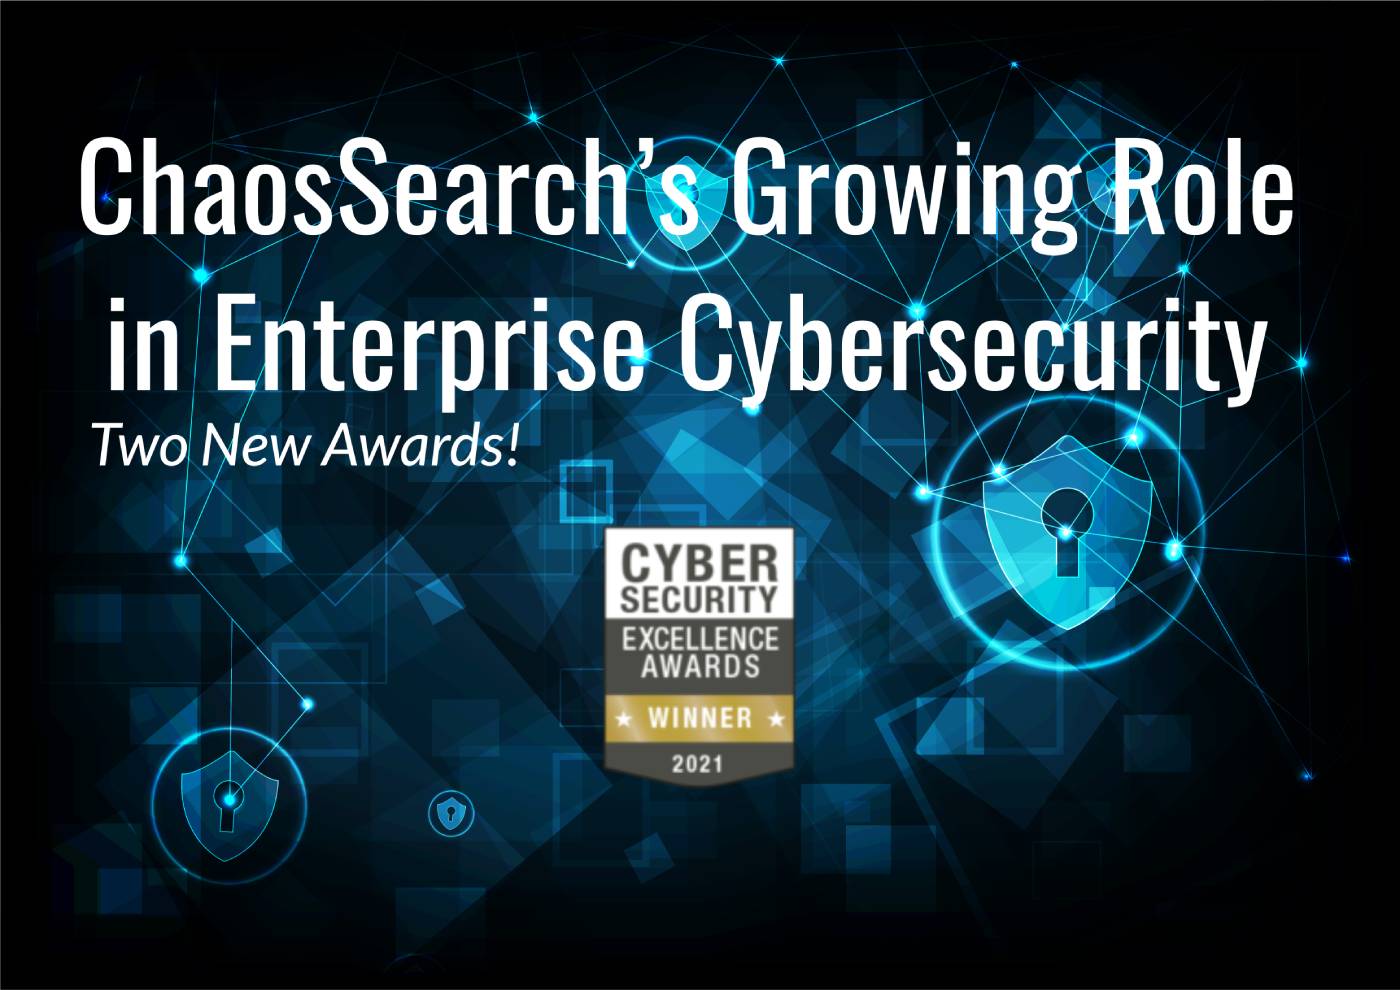 Two Major Industry Awards Confirm ChaosSearch’s Growing Role in Enterprise Cybersecurity